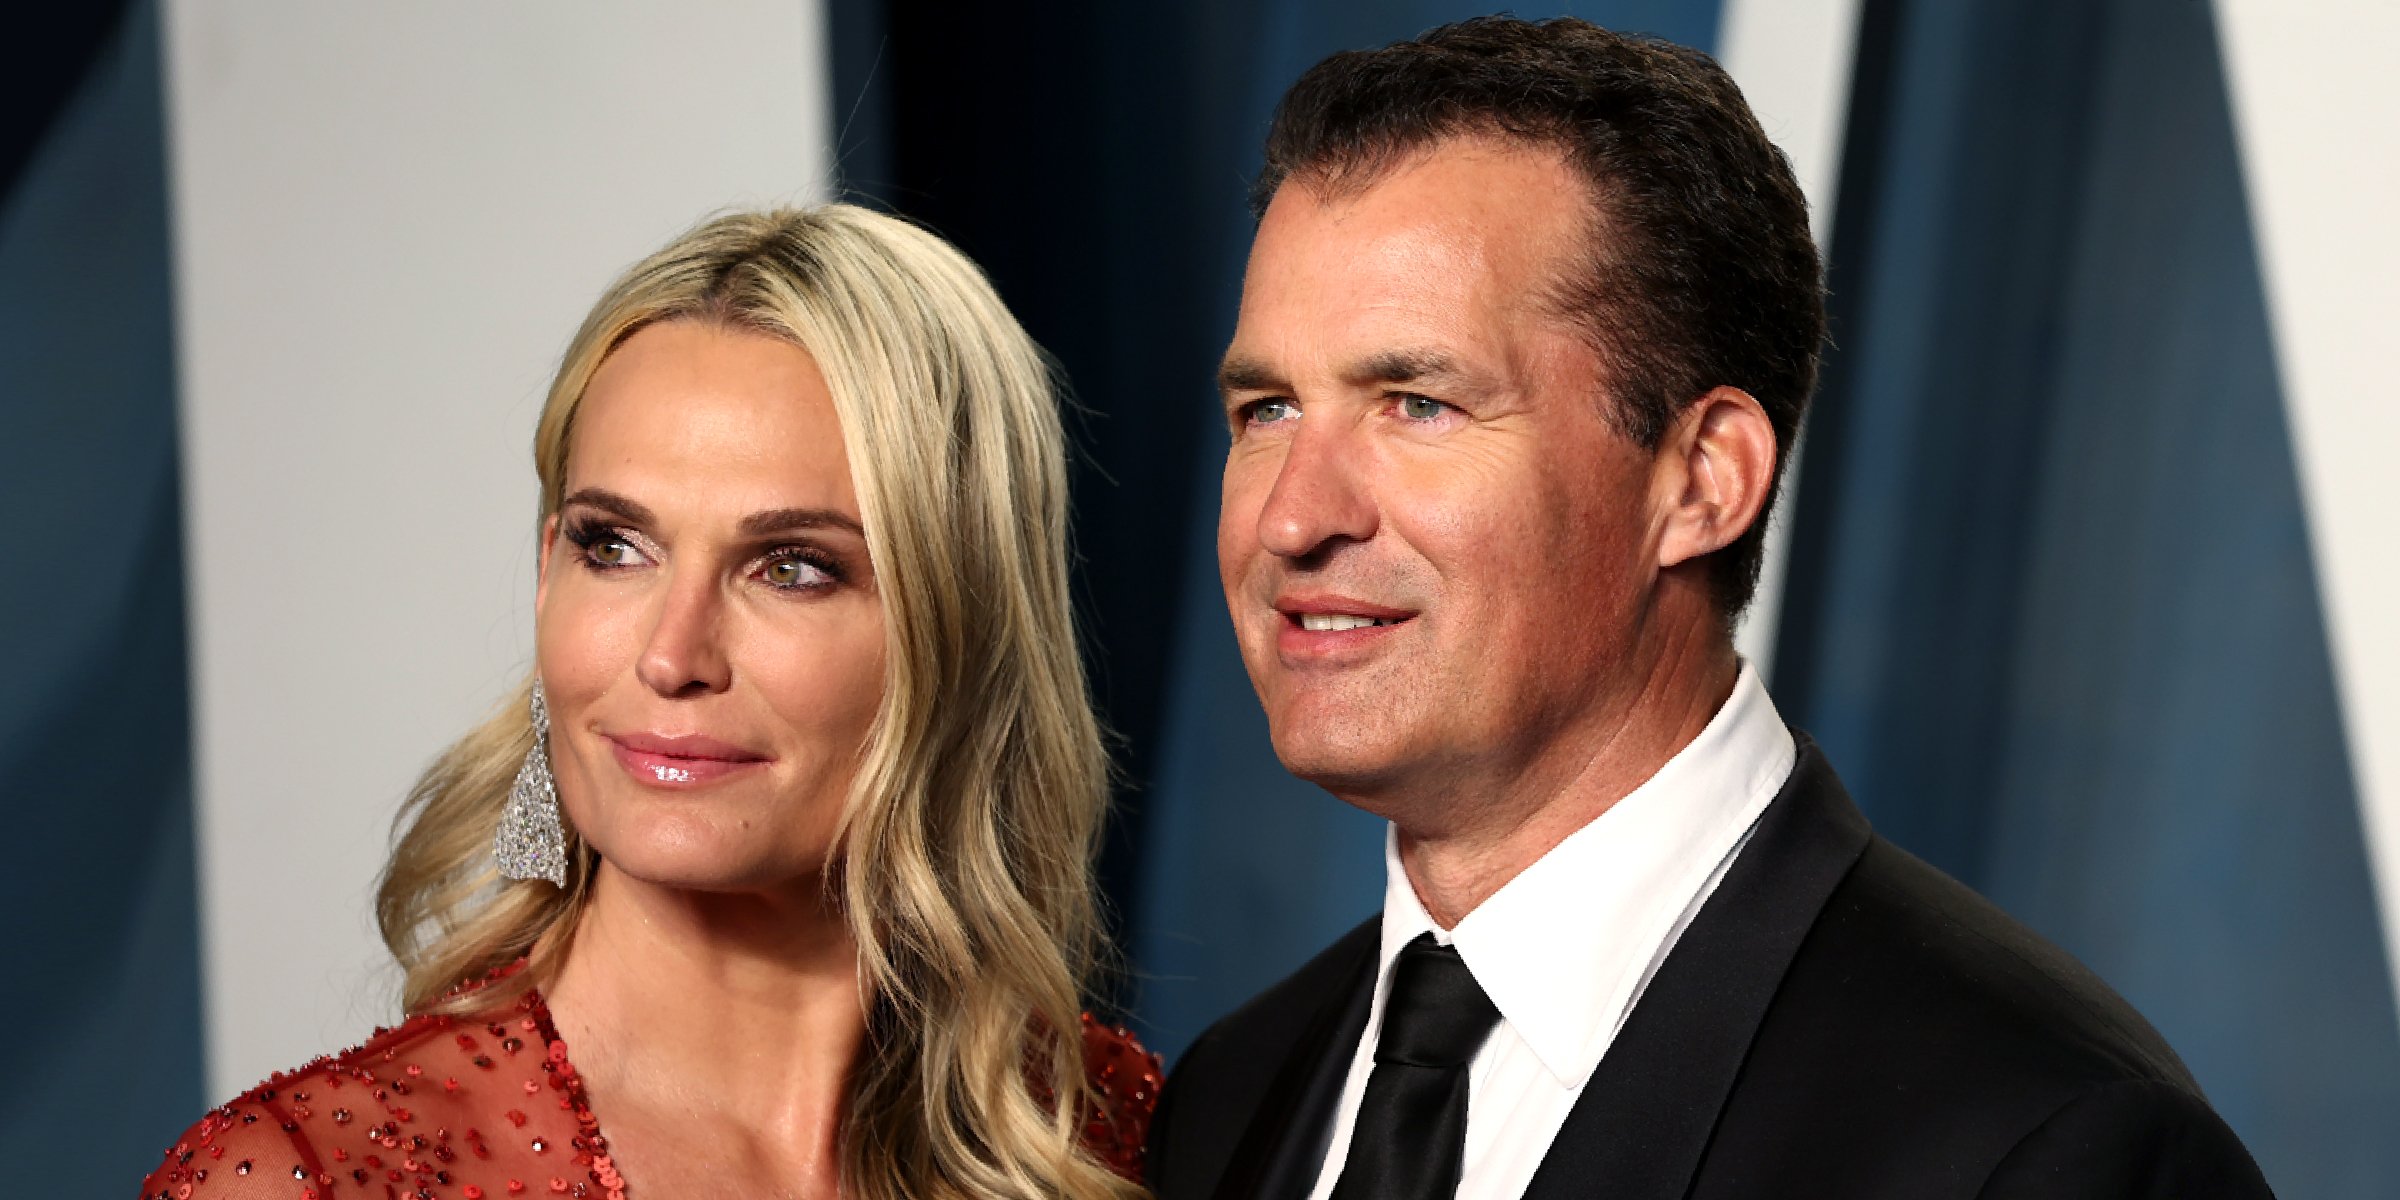 Molly Sims and Scott Stuber. | Source: Getty Images